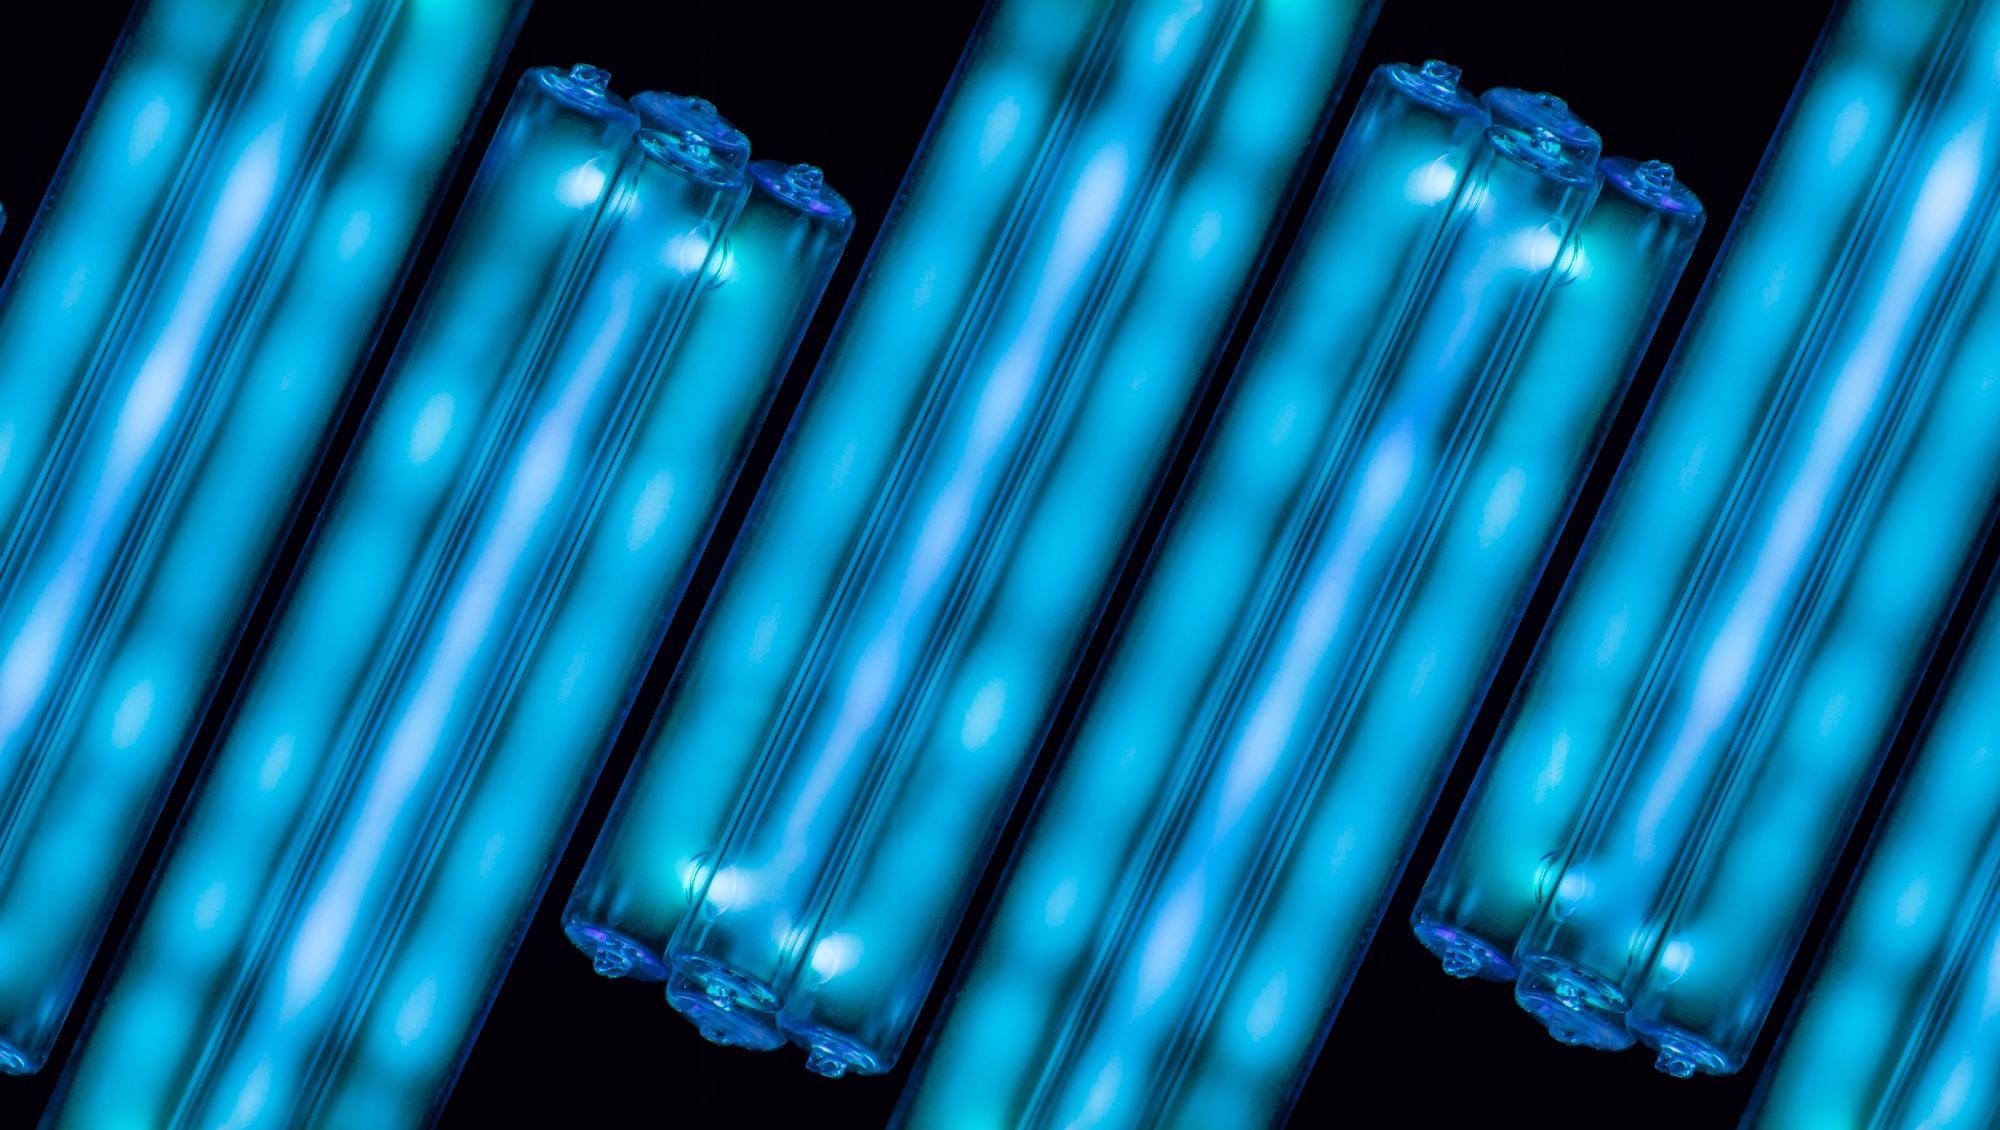 Study: Aerosol decontamination and spatial separation using a free-space LED-based UV-C light curtain. Image Credit: Eduardo Y / Shutterstock